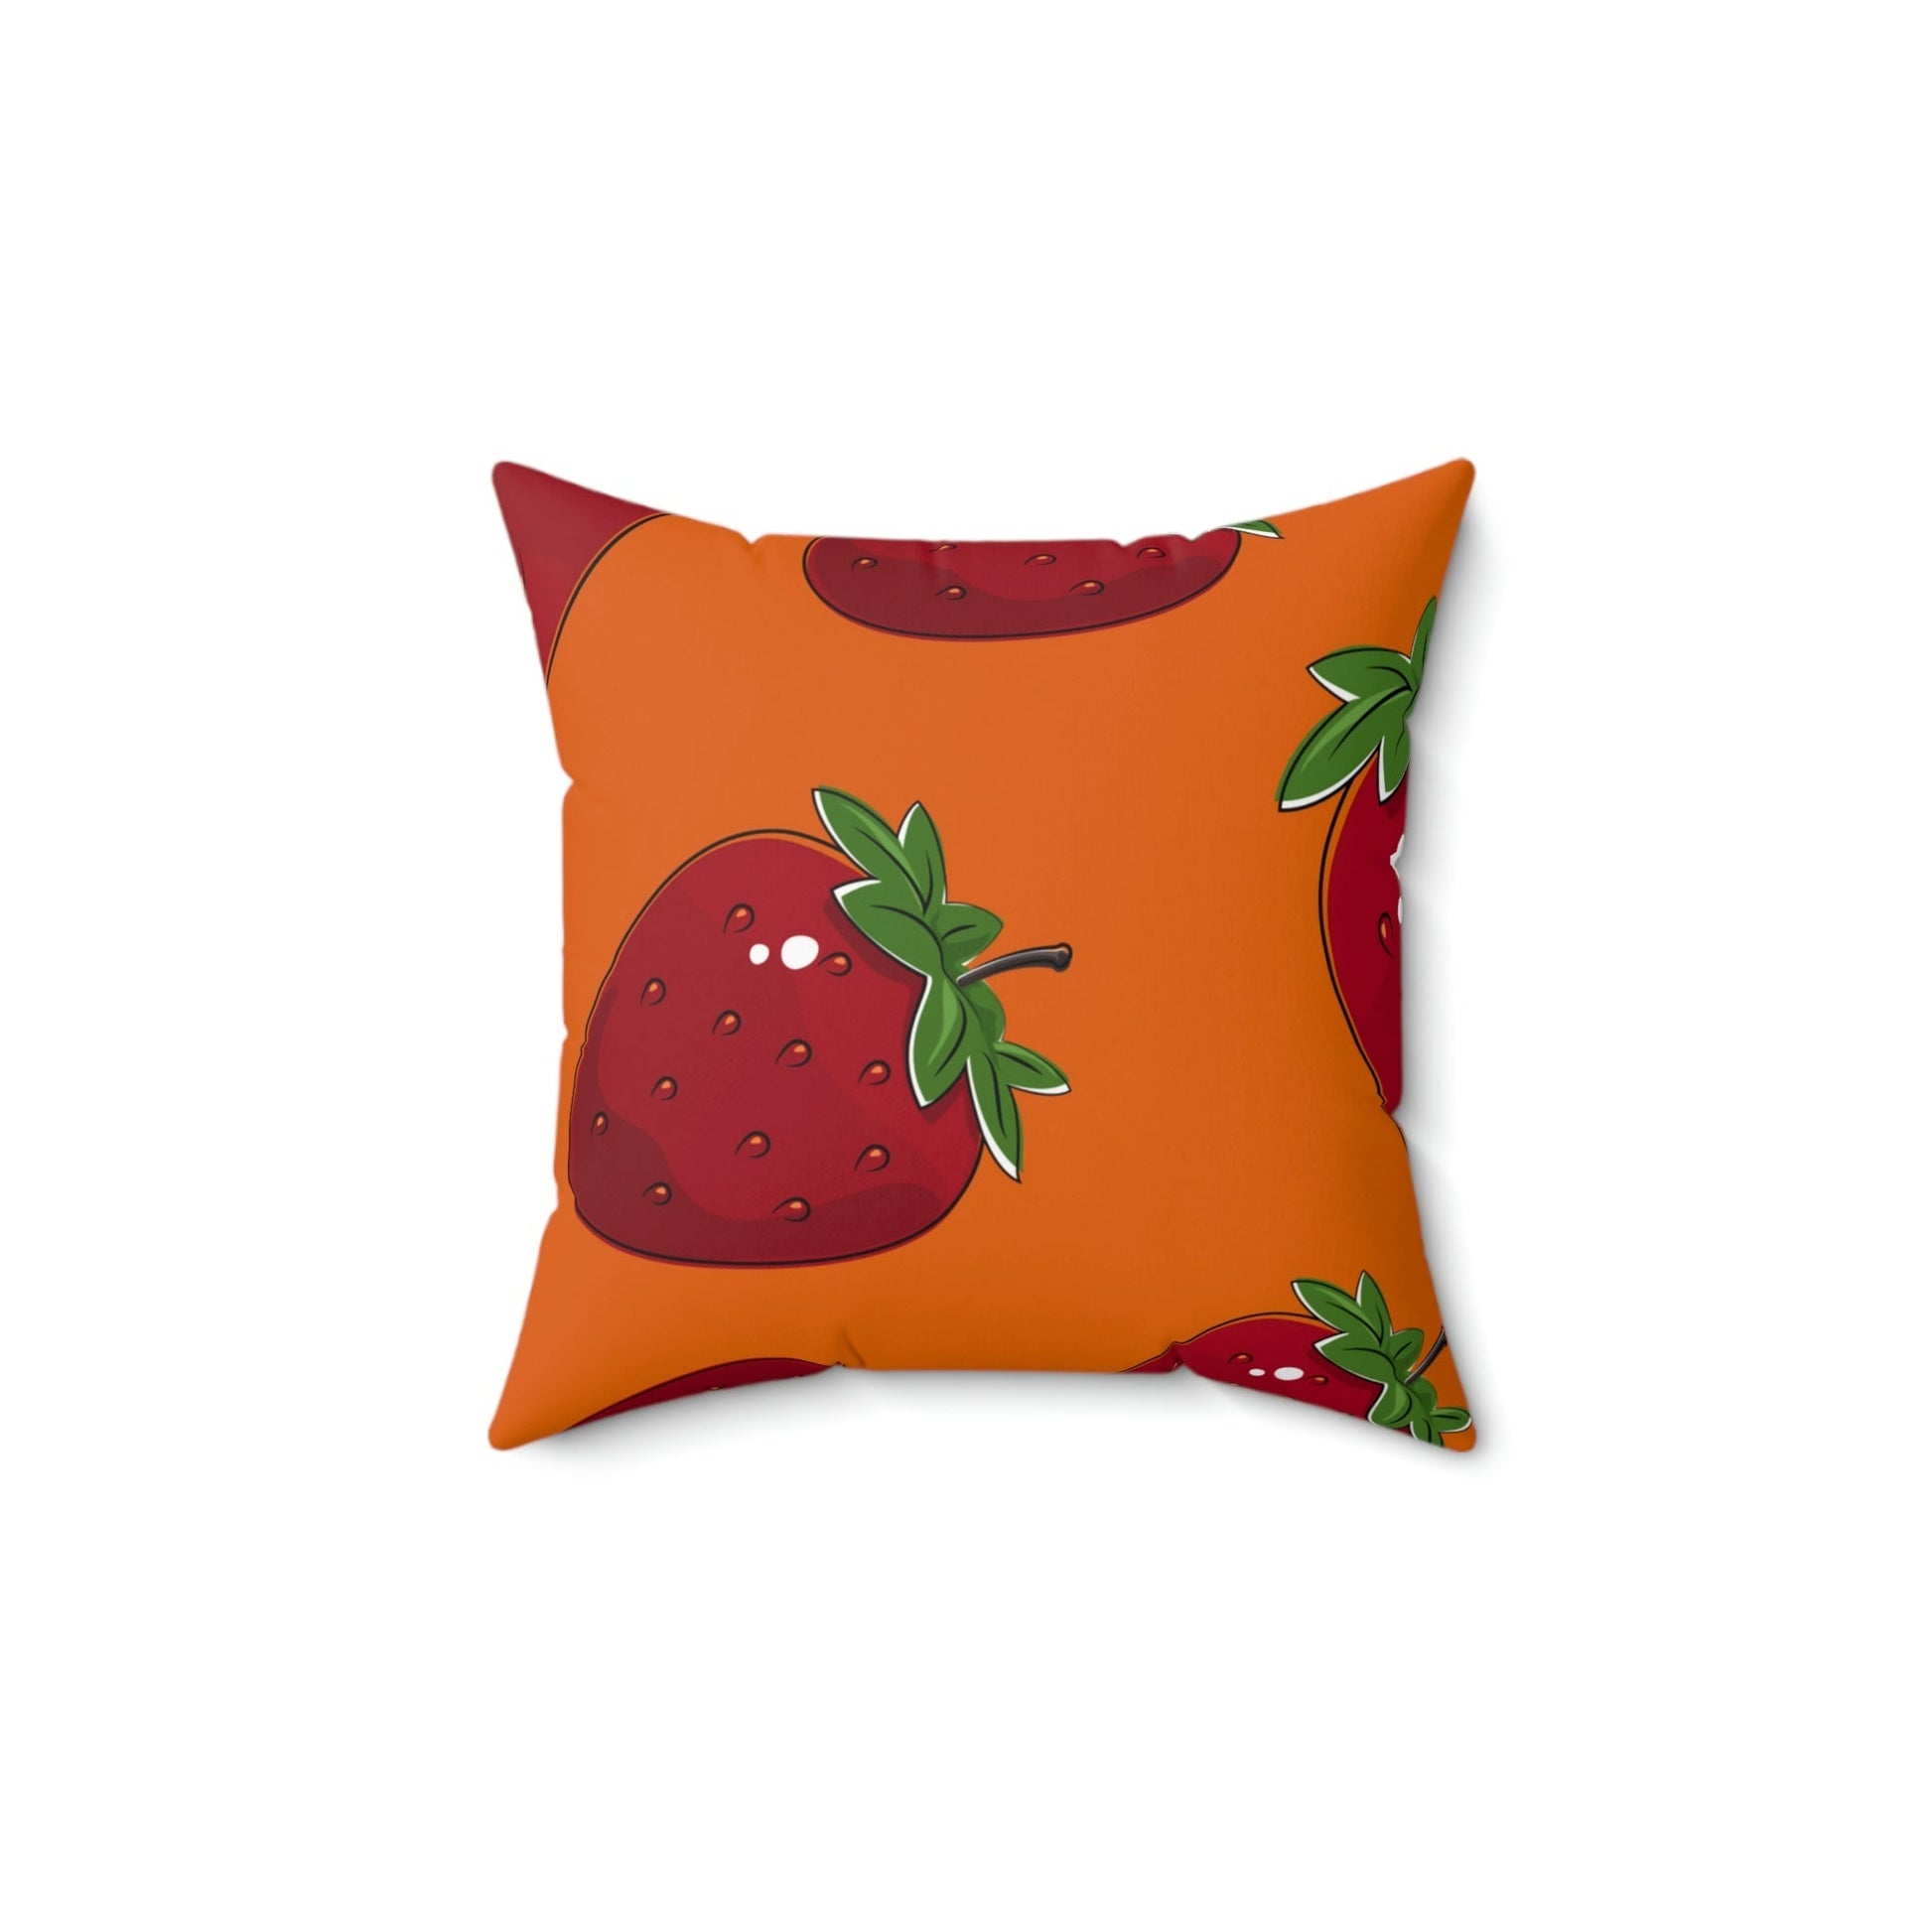 Fresh Picked Strawberries Square Pillow Home Decor Pink Sweetheart